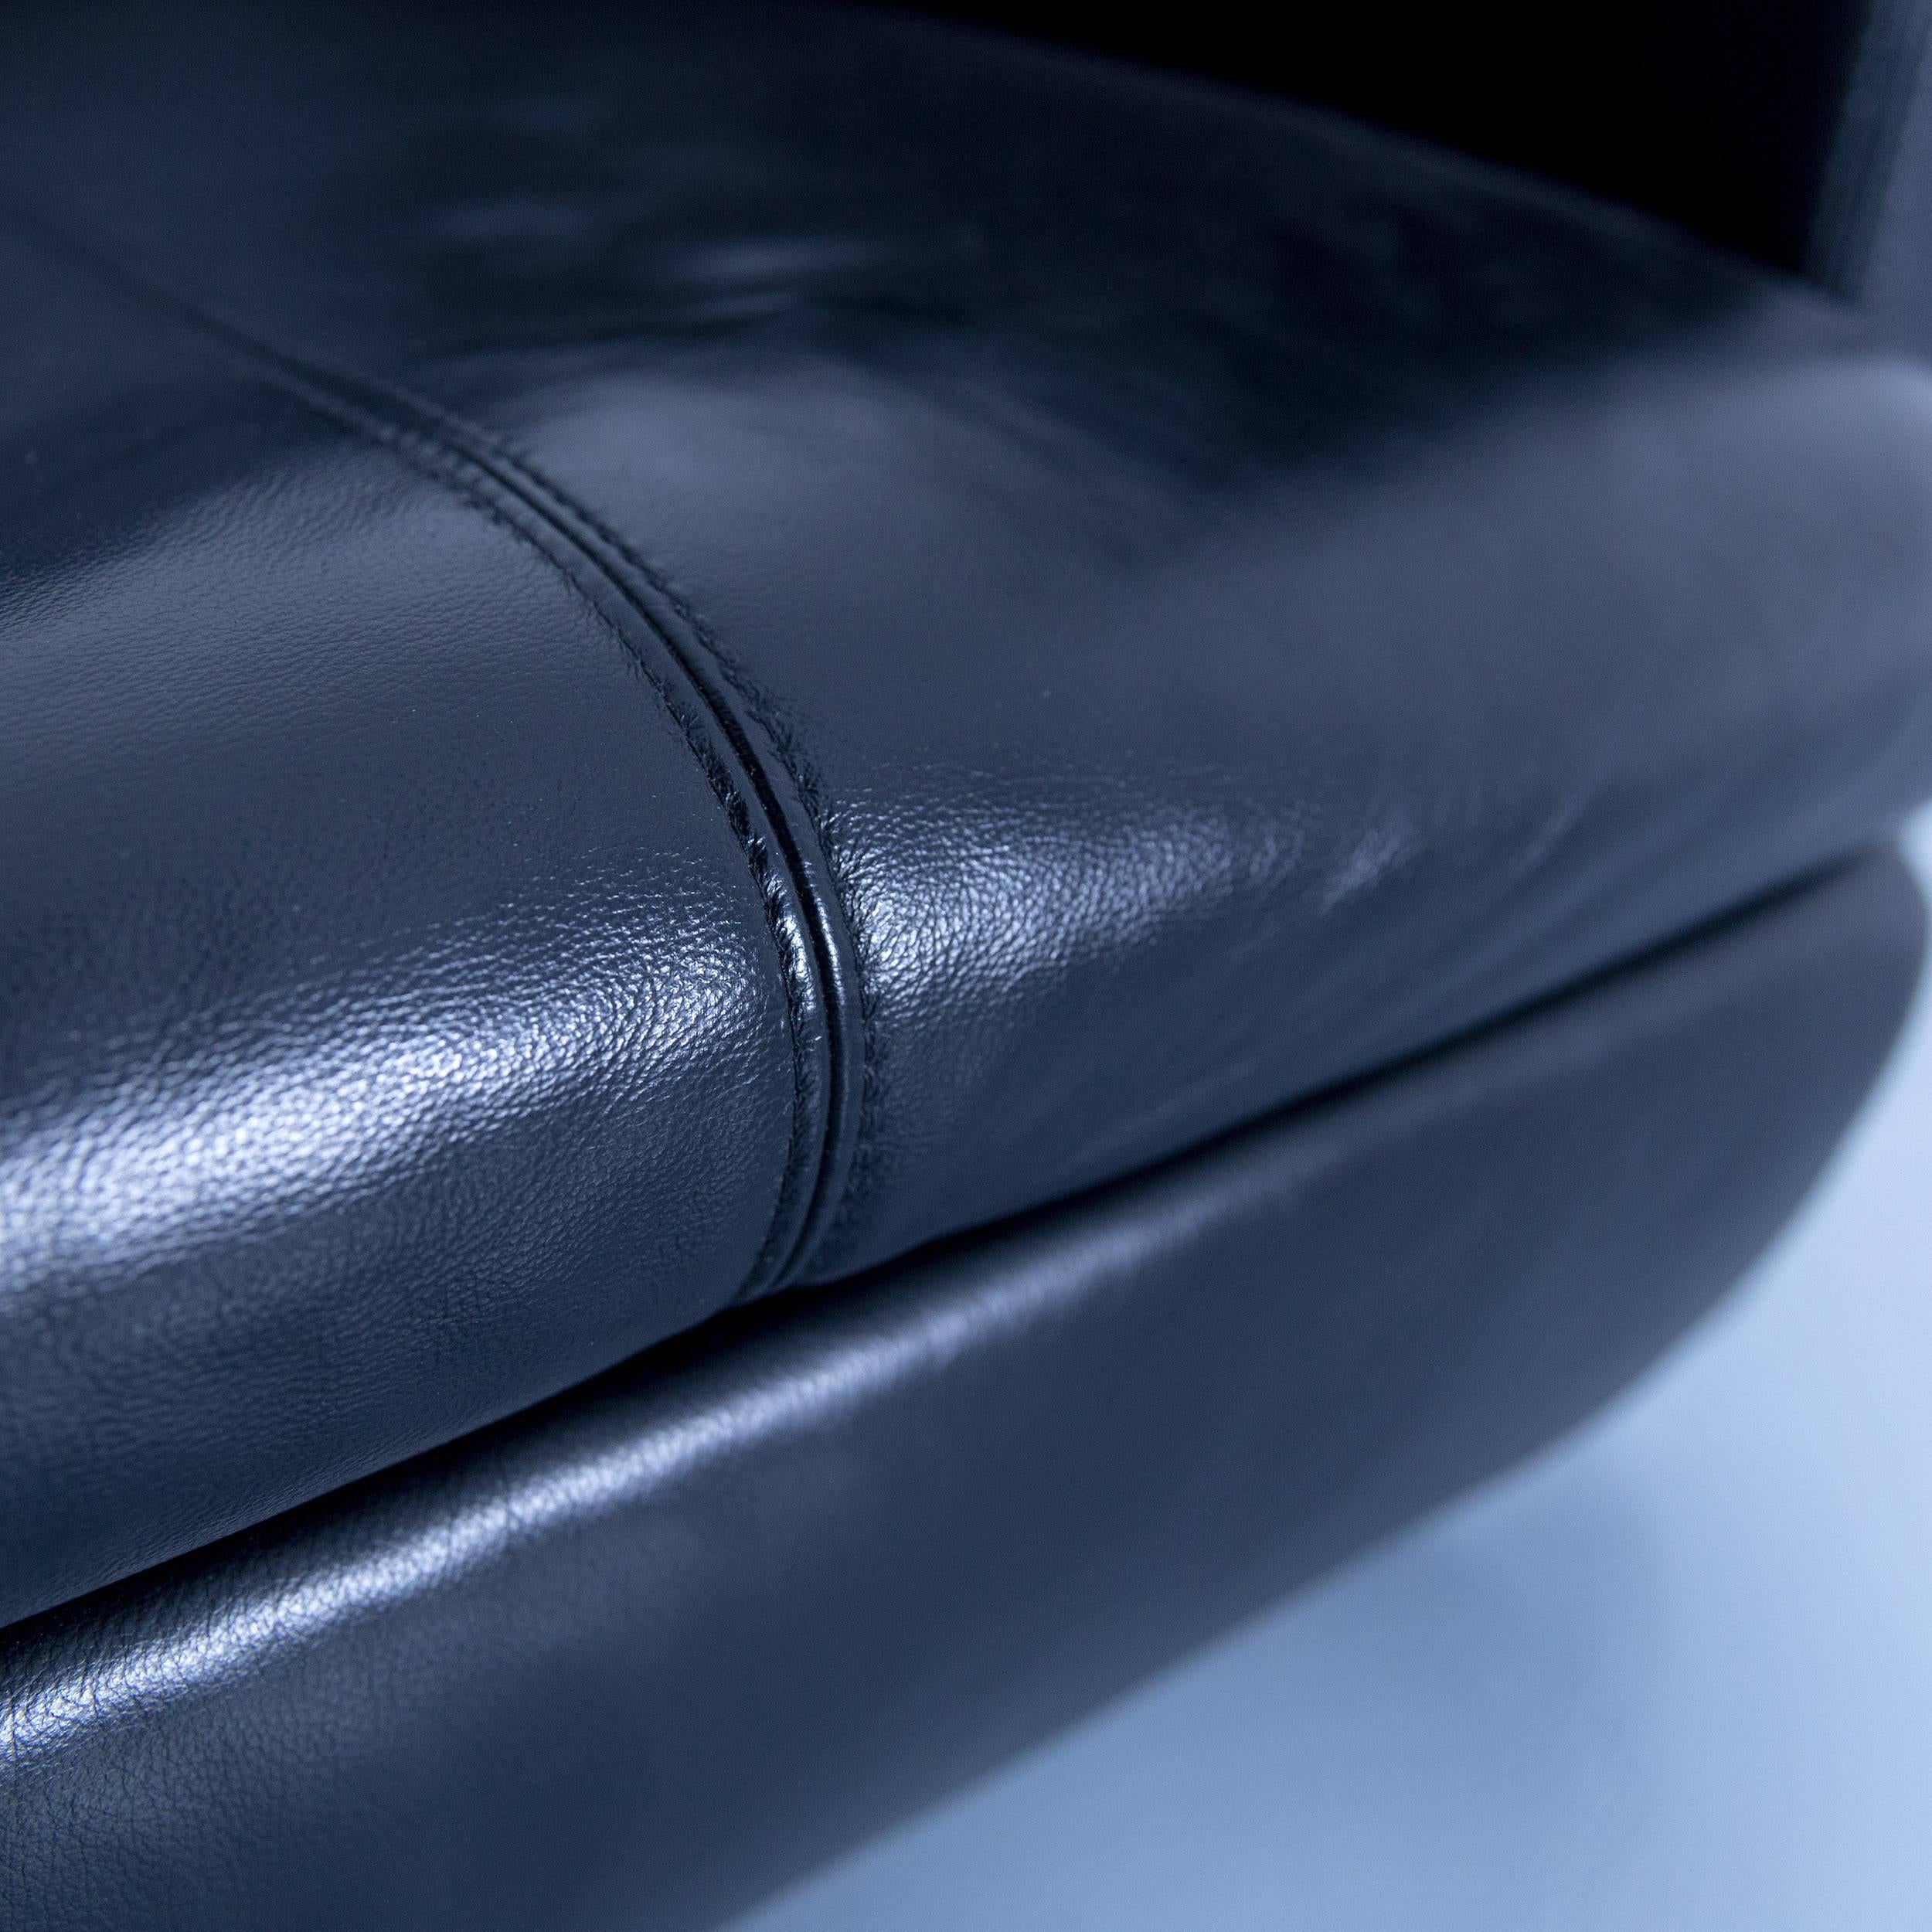 Contemporary Designer Chair Leather Black Relax Function Couch Modern Minimal Metal